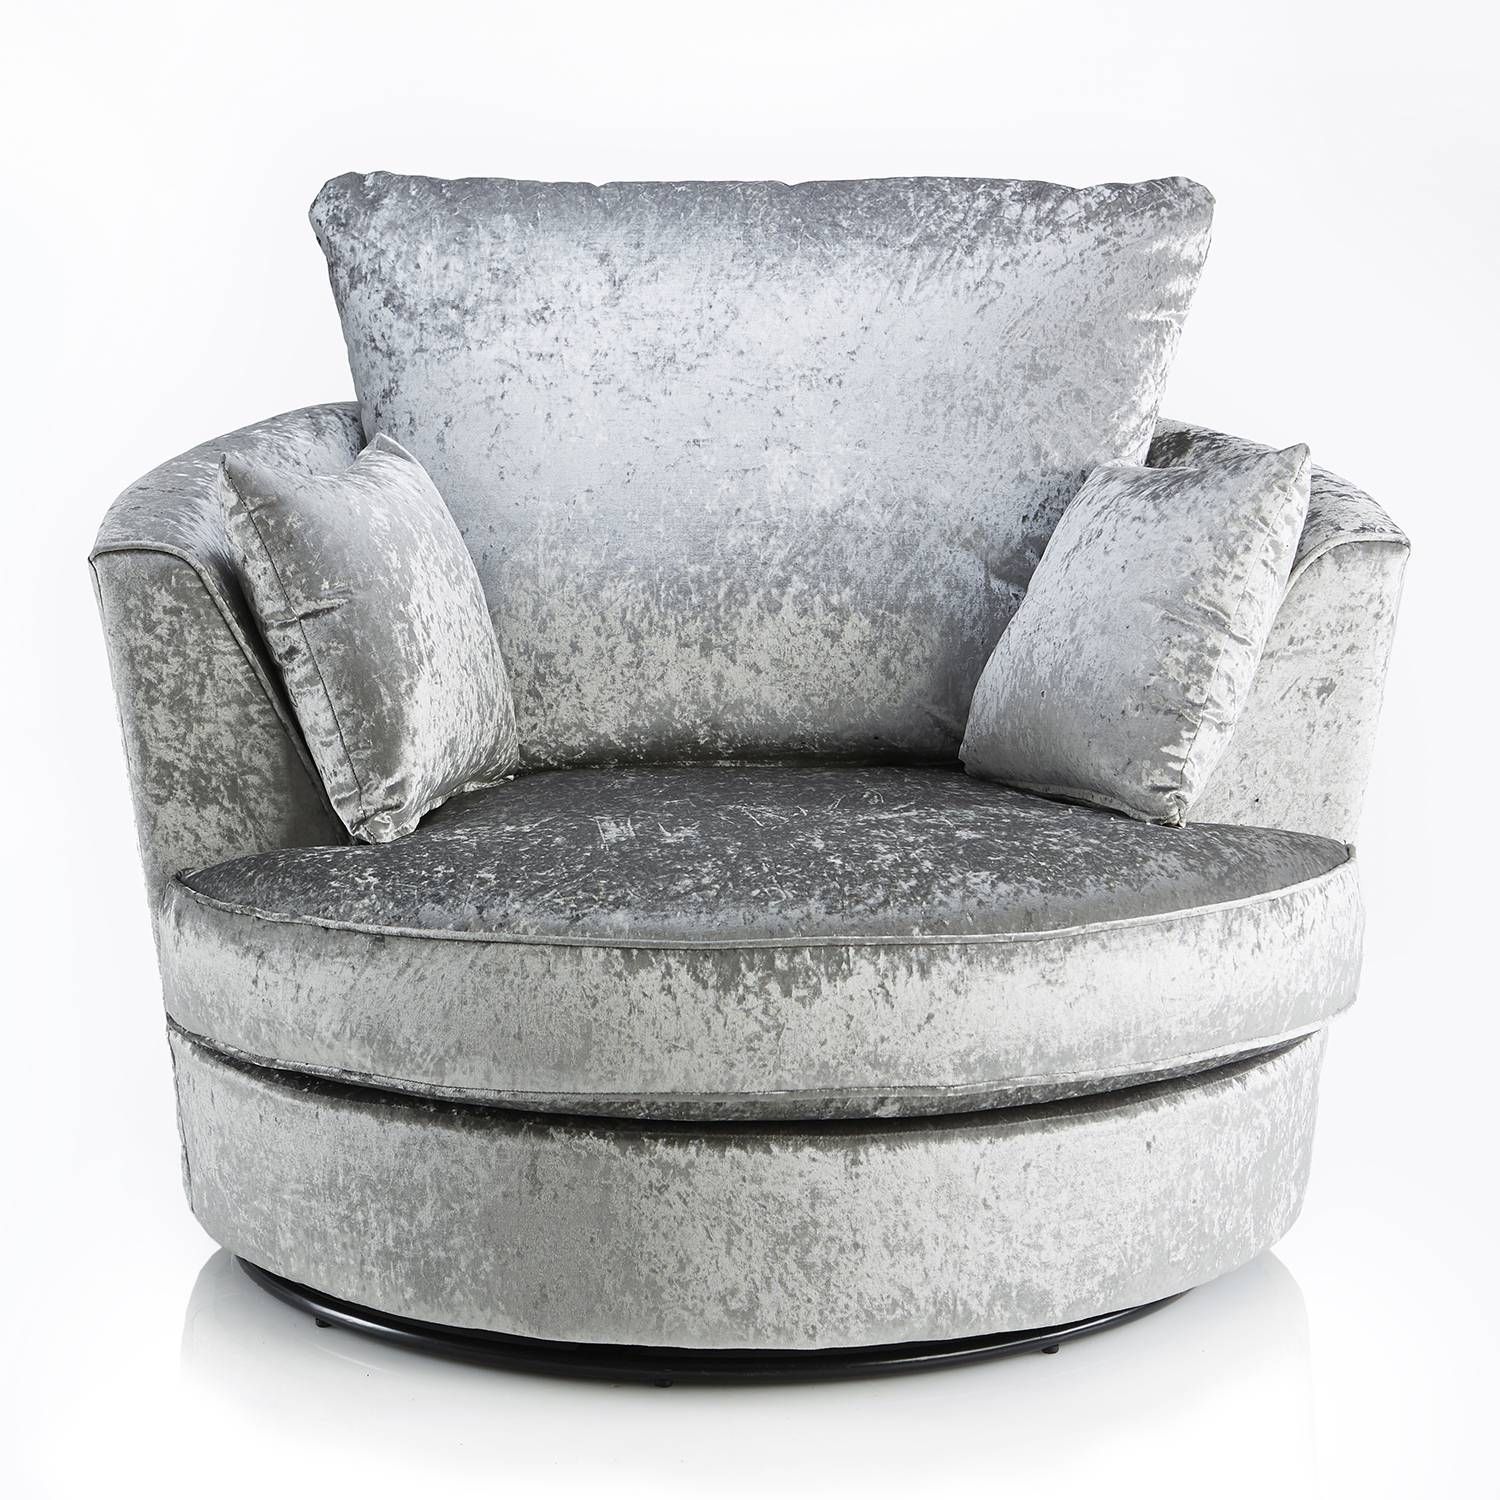 Crushed Velvet Furniture | Sofas, Beds, Chairs, Cushions With Regard To Corner Sofa And Swivel Chairs (Photo 26 of 30)